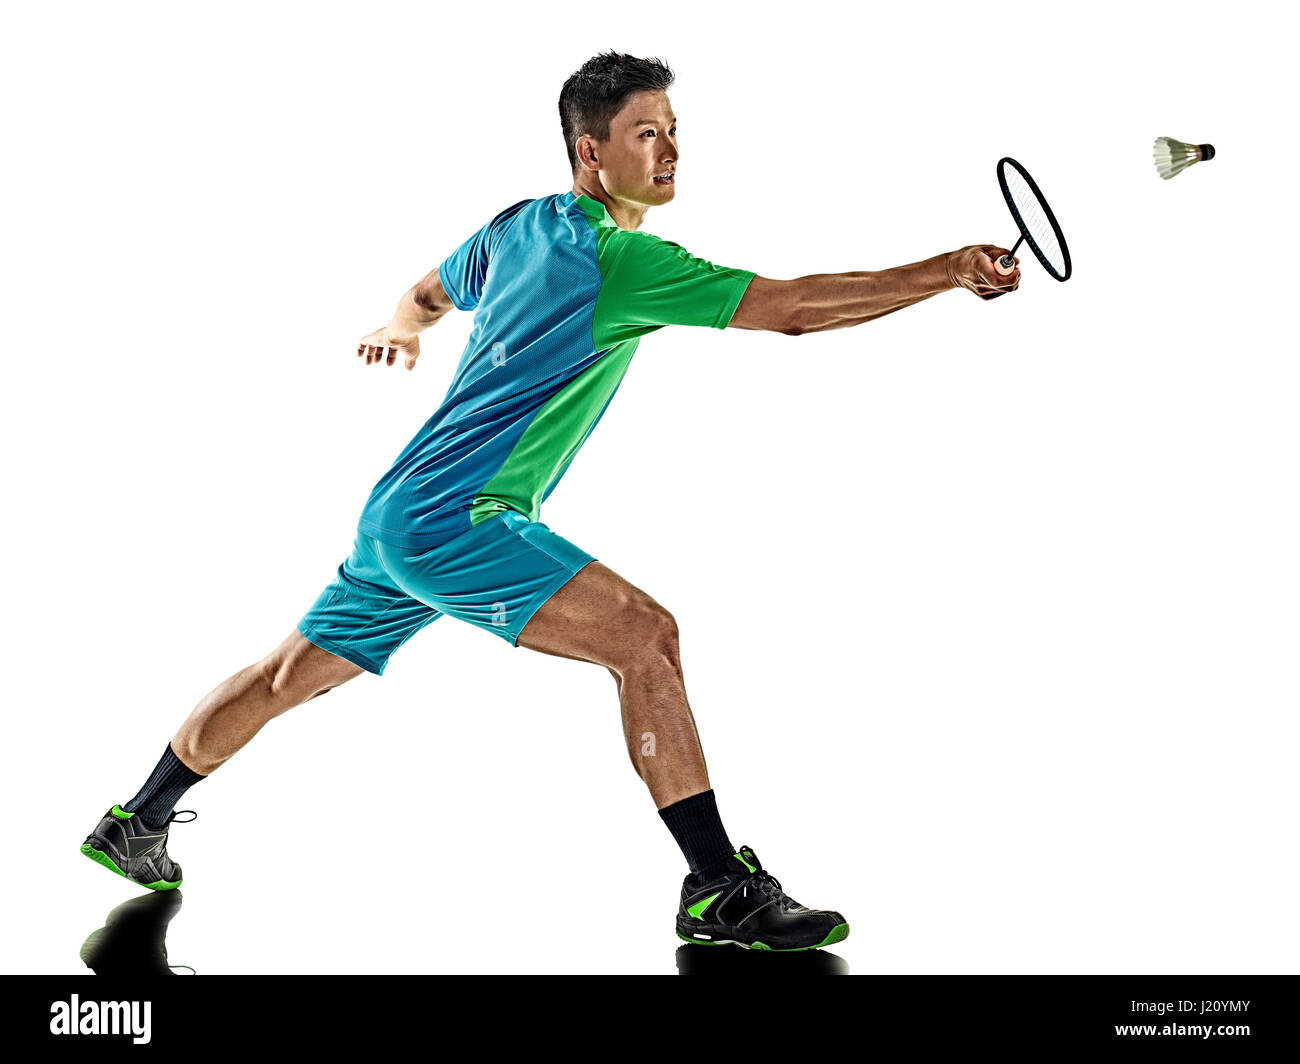 one asian badminton player man isolated on white background Stock Photo